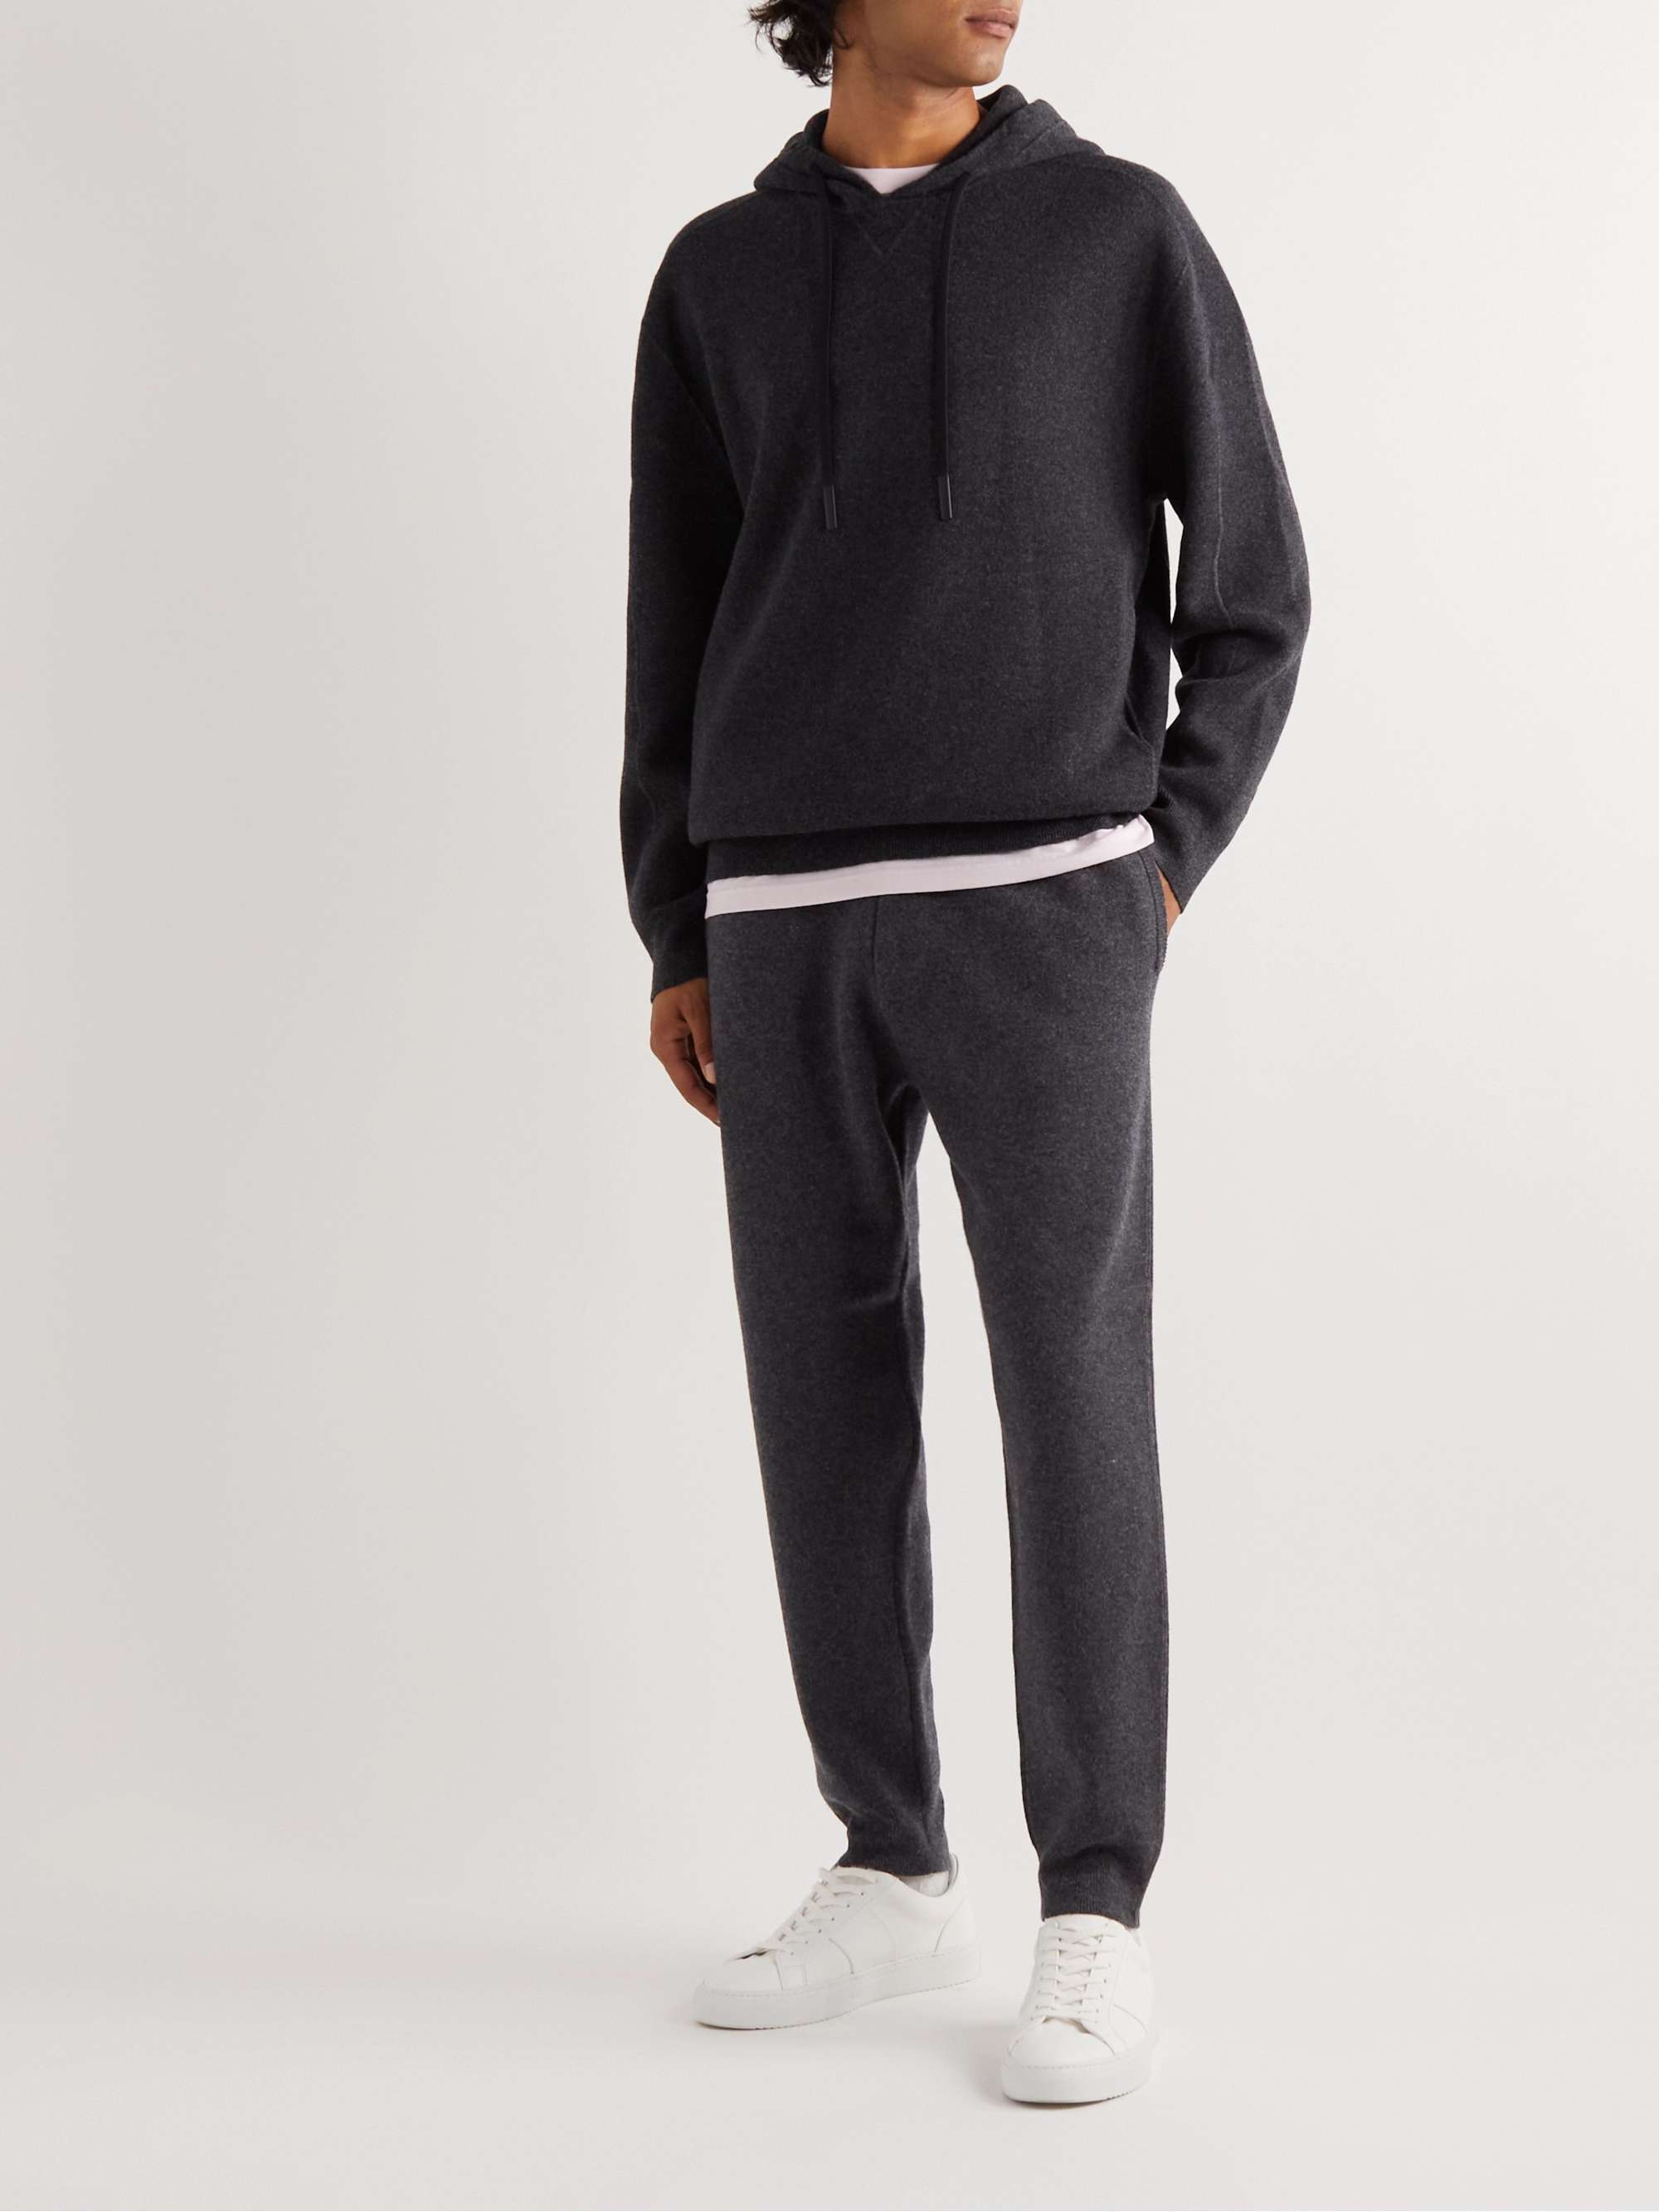 THEORY Alcos Tapered Wool-Blend Sweatpants for Men | MR PORTER